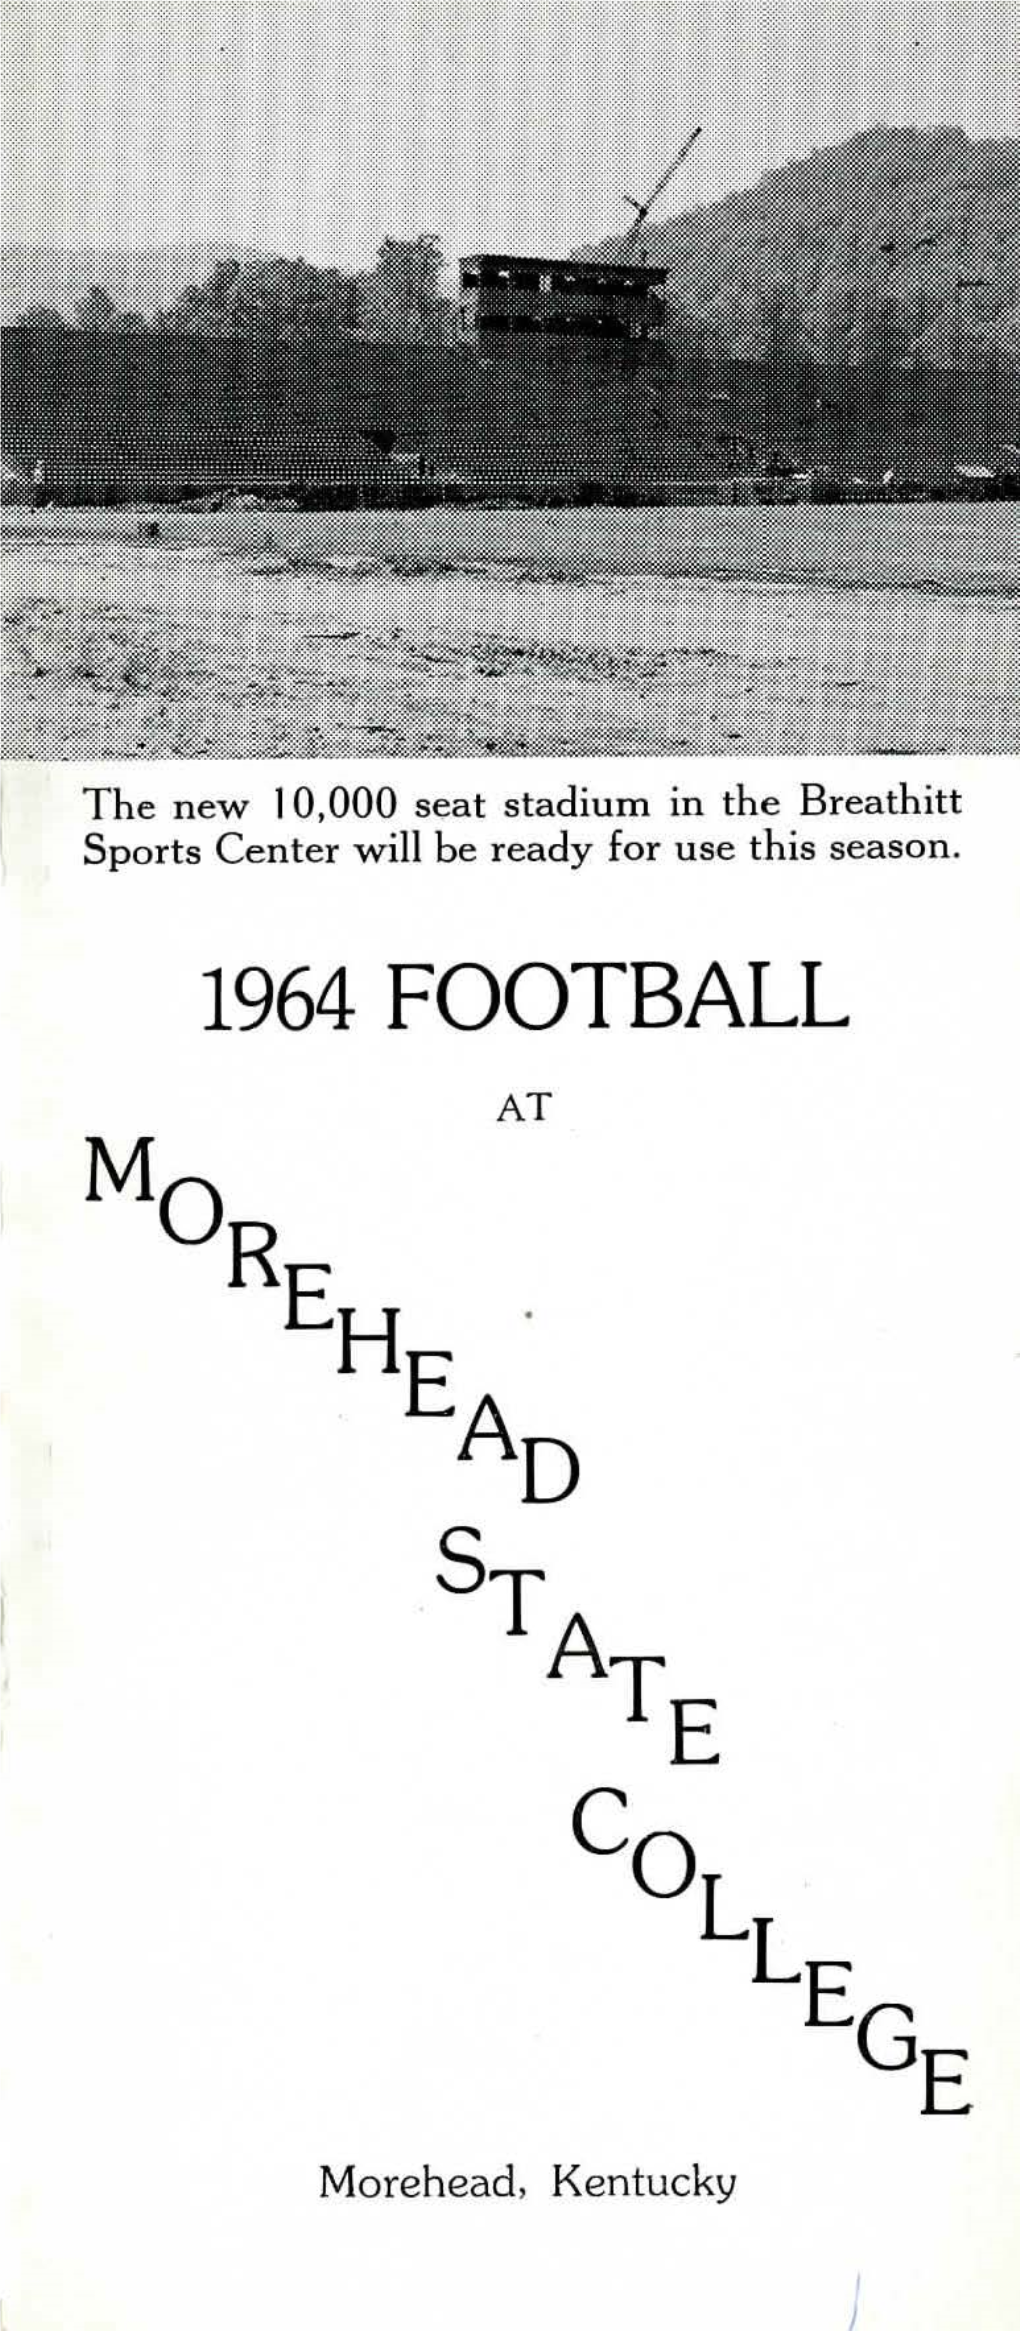 1964 FOOTBALL at Morehead State College